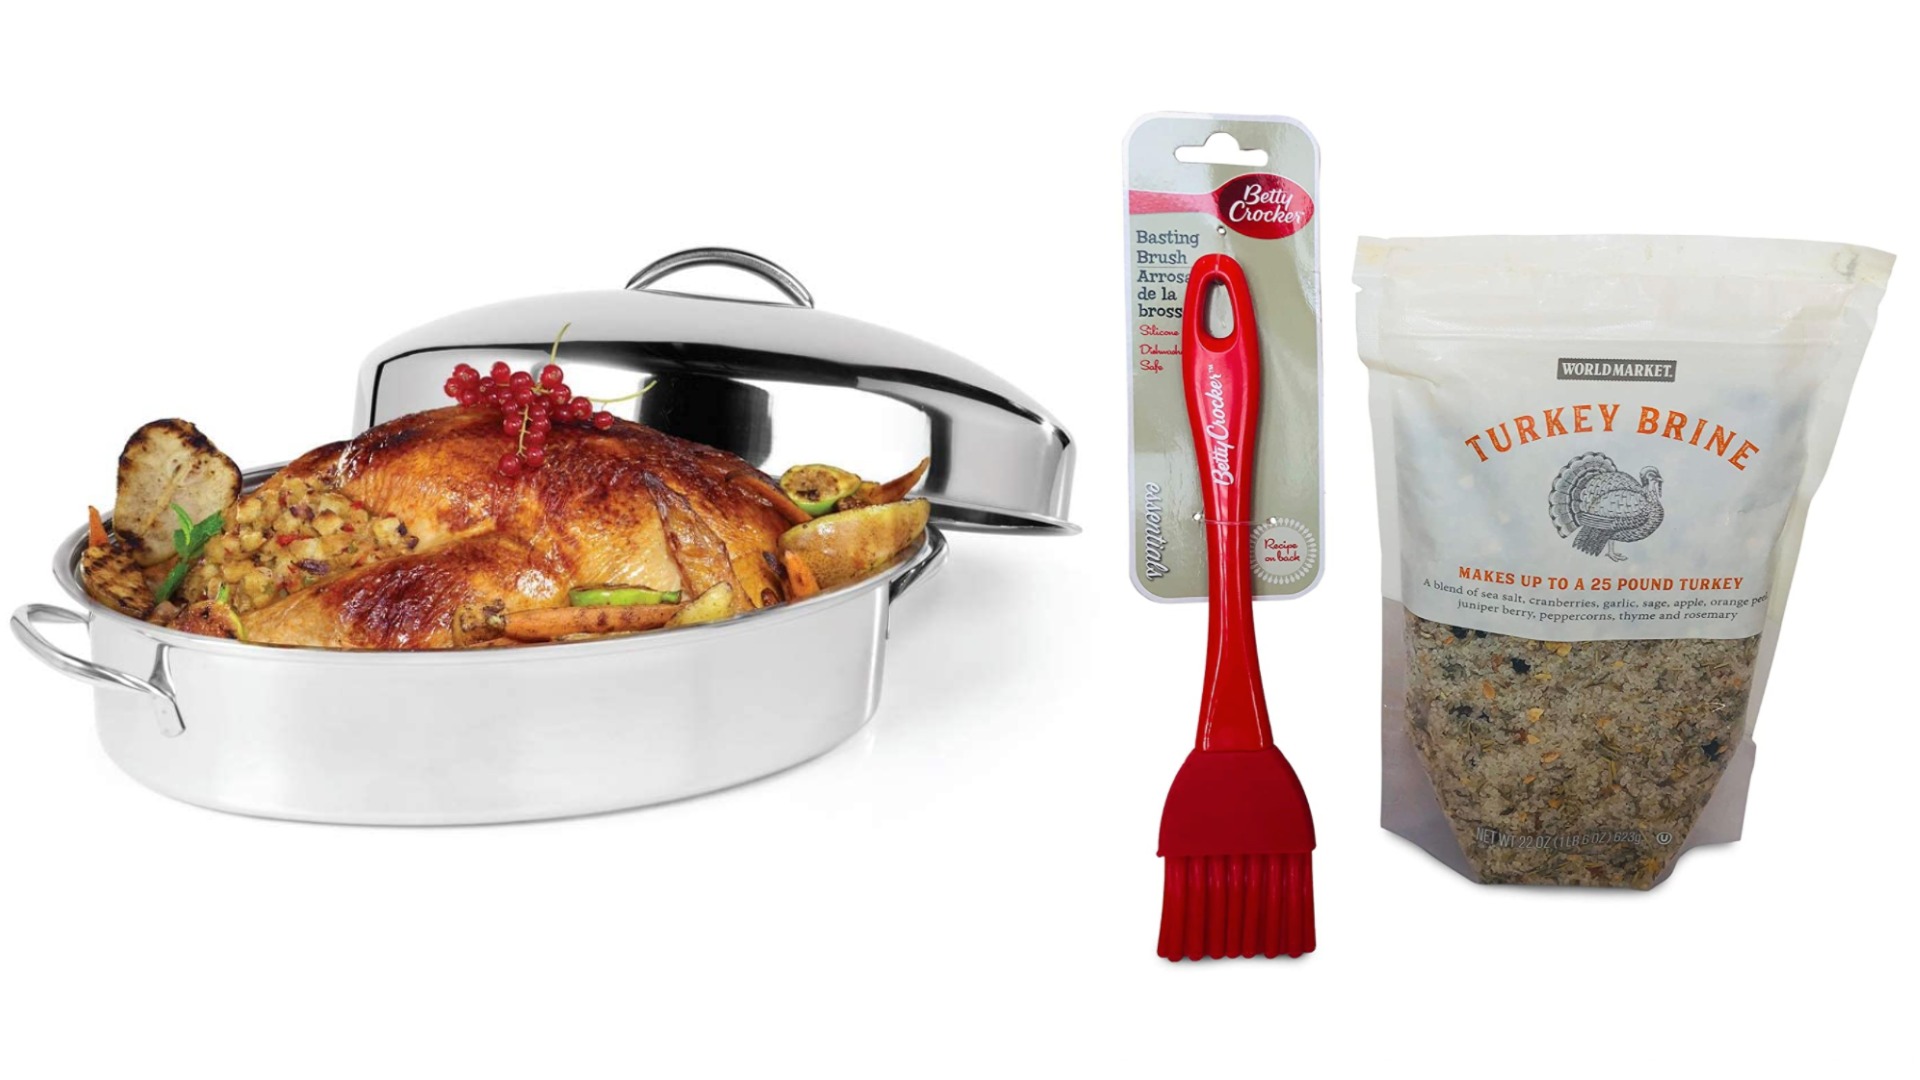 1 Baster 1 Baster brush and 1 Flavor Injector Complete Turkey Roasting Kit with 1 Thermometer 